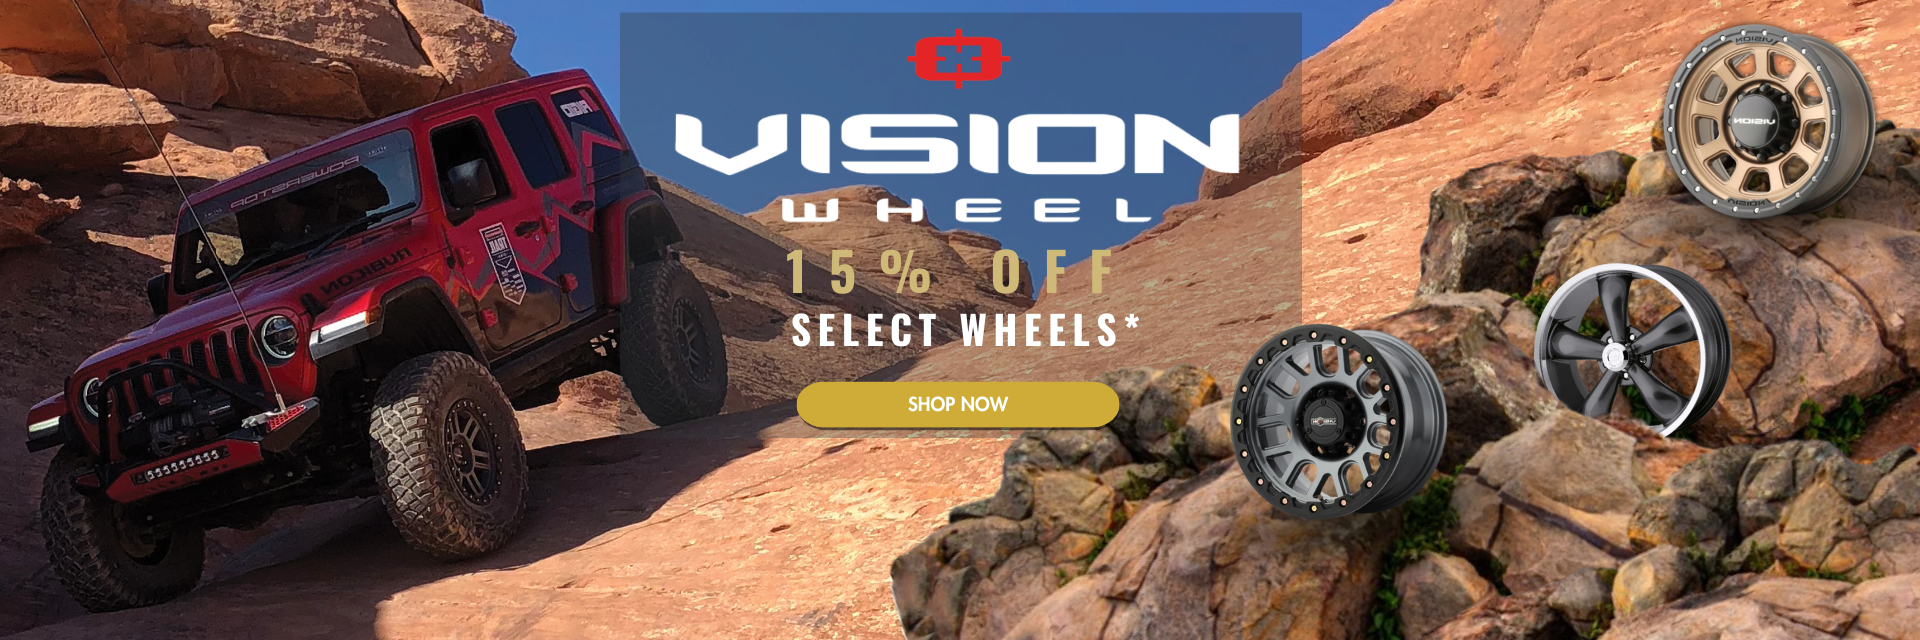 Vision Wheel Promotional Image - 15% Off